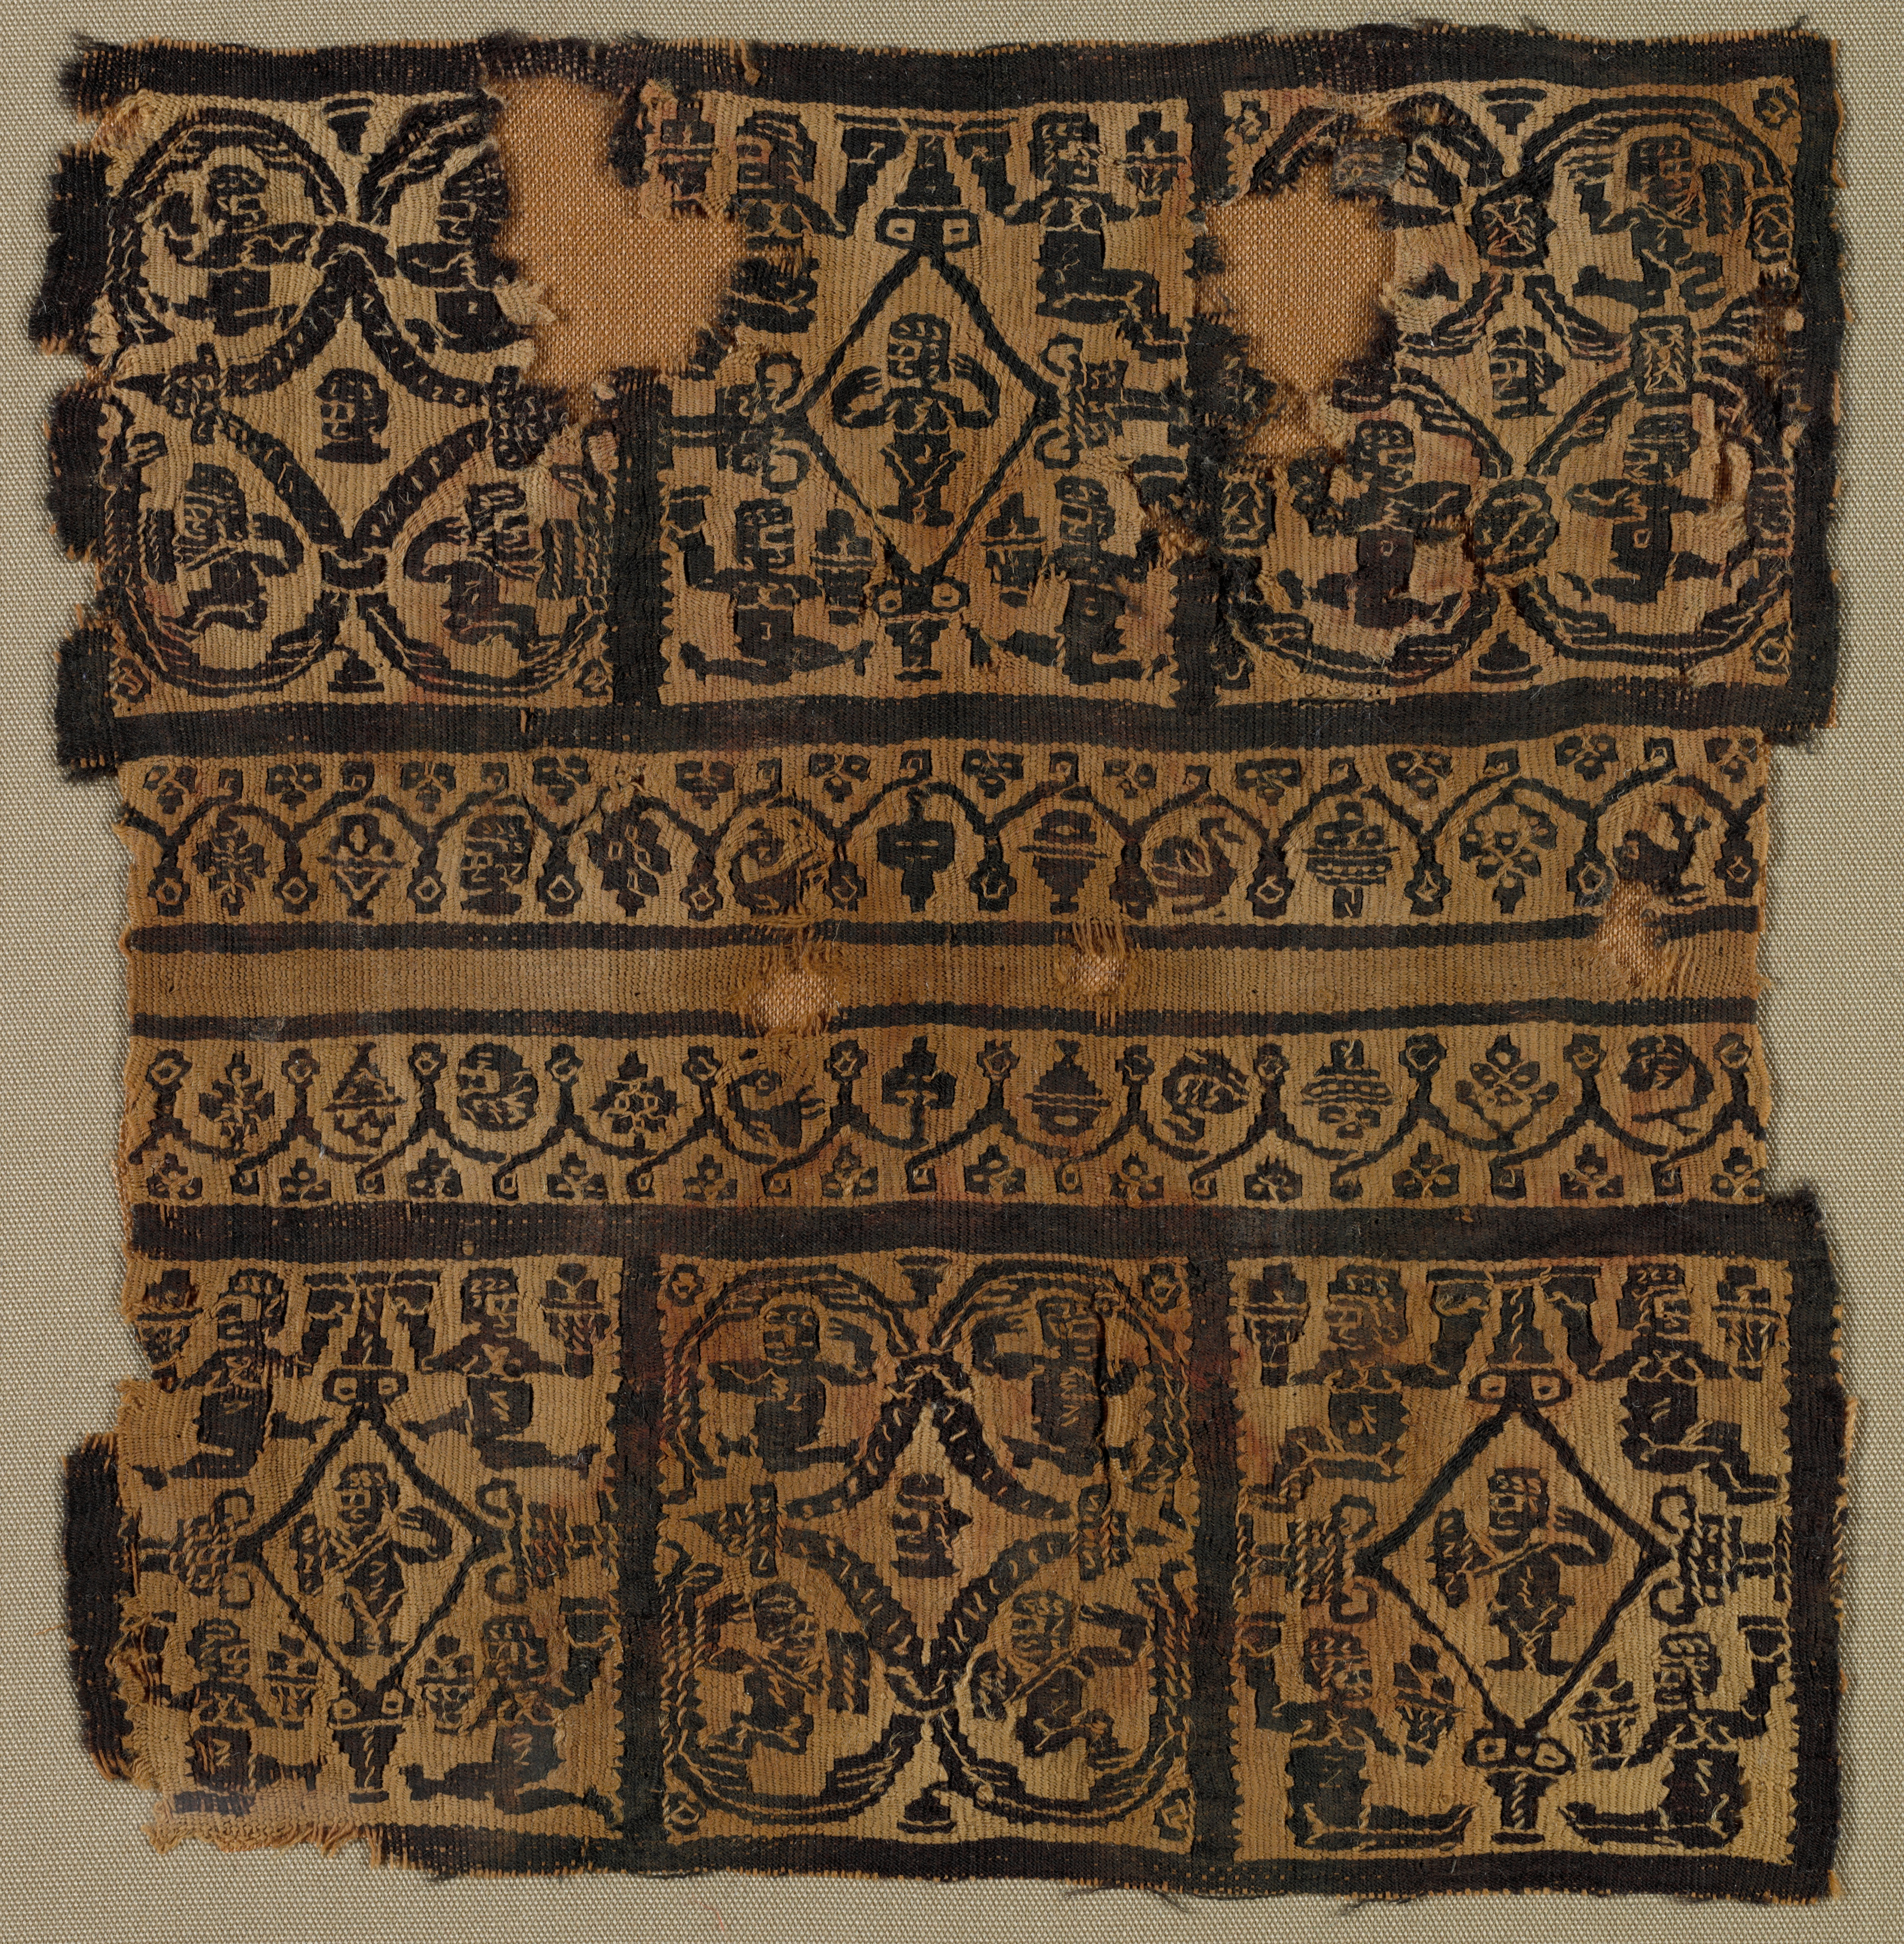 Fragment, Sleeve Ornament from a Tunic